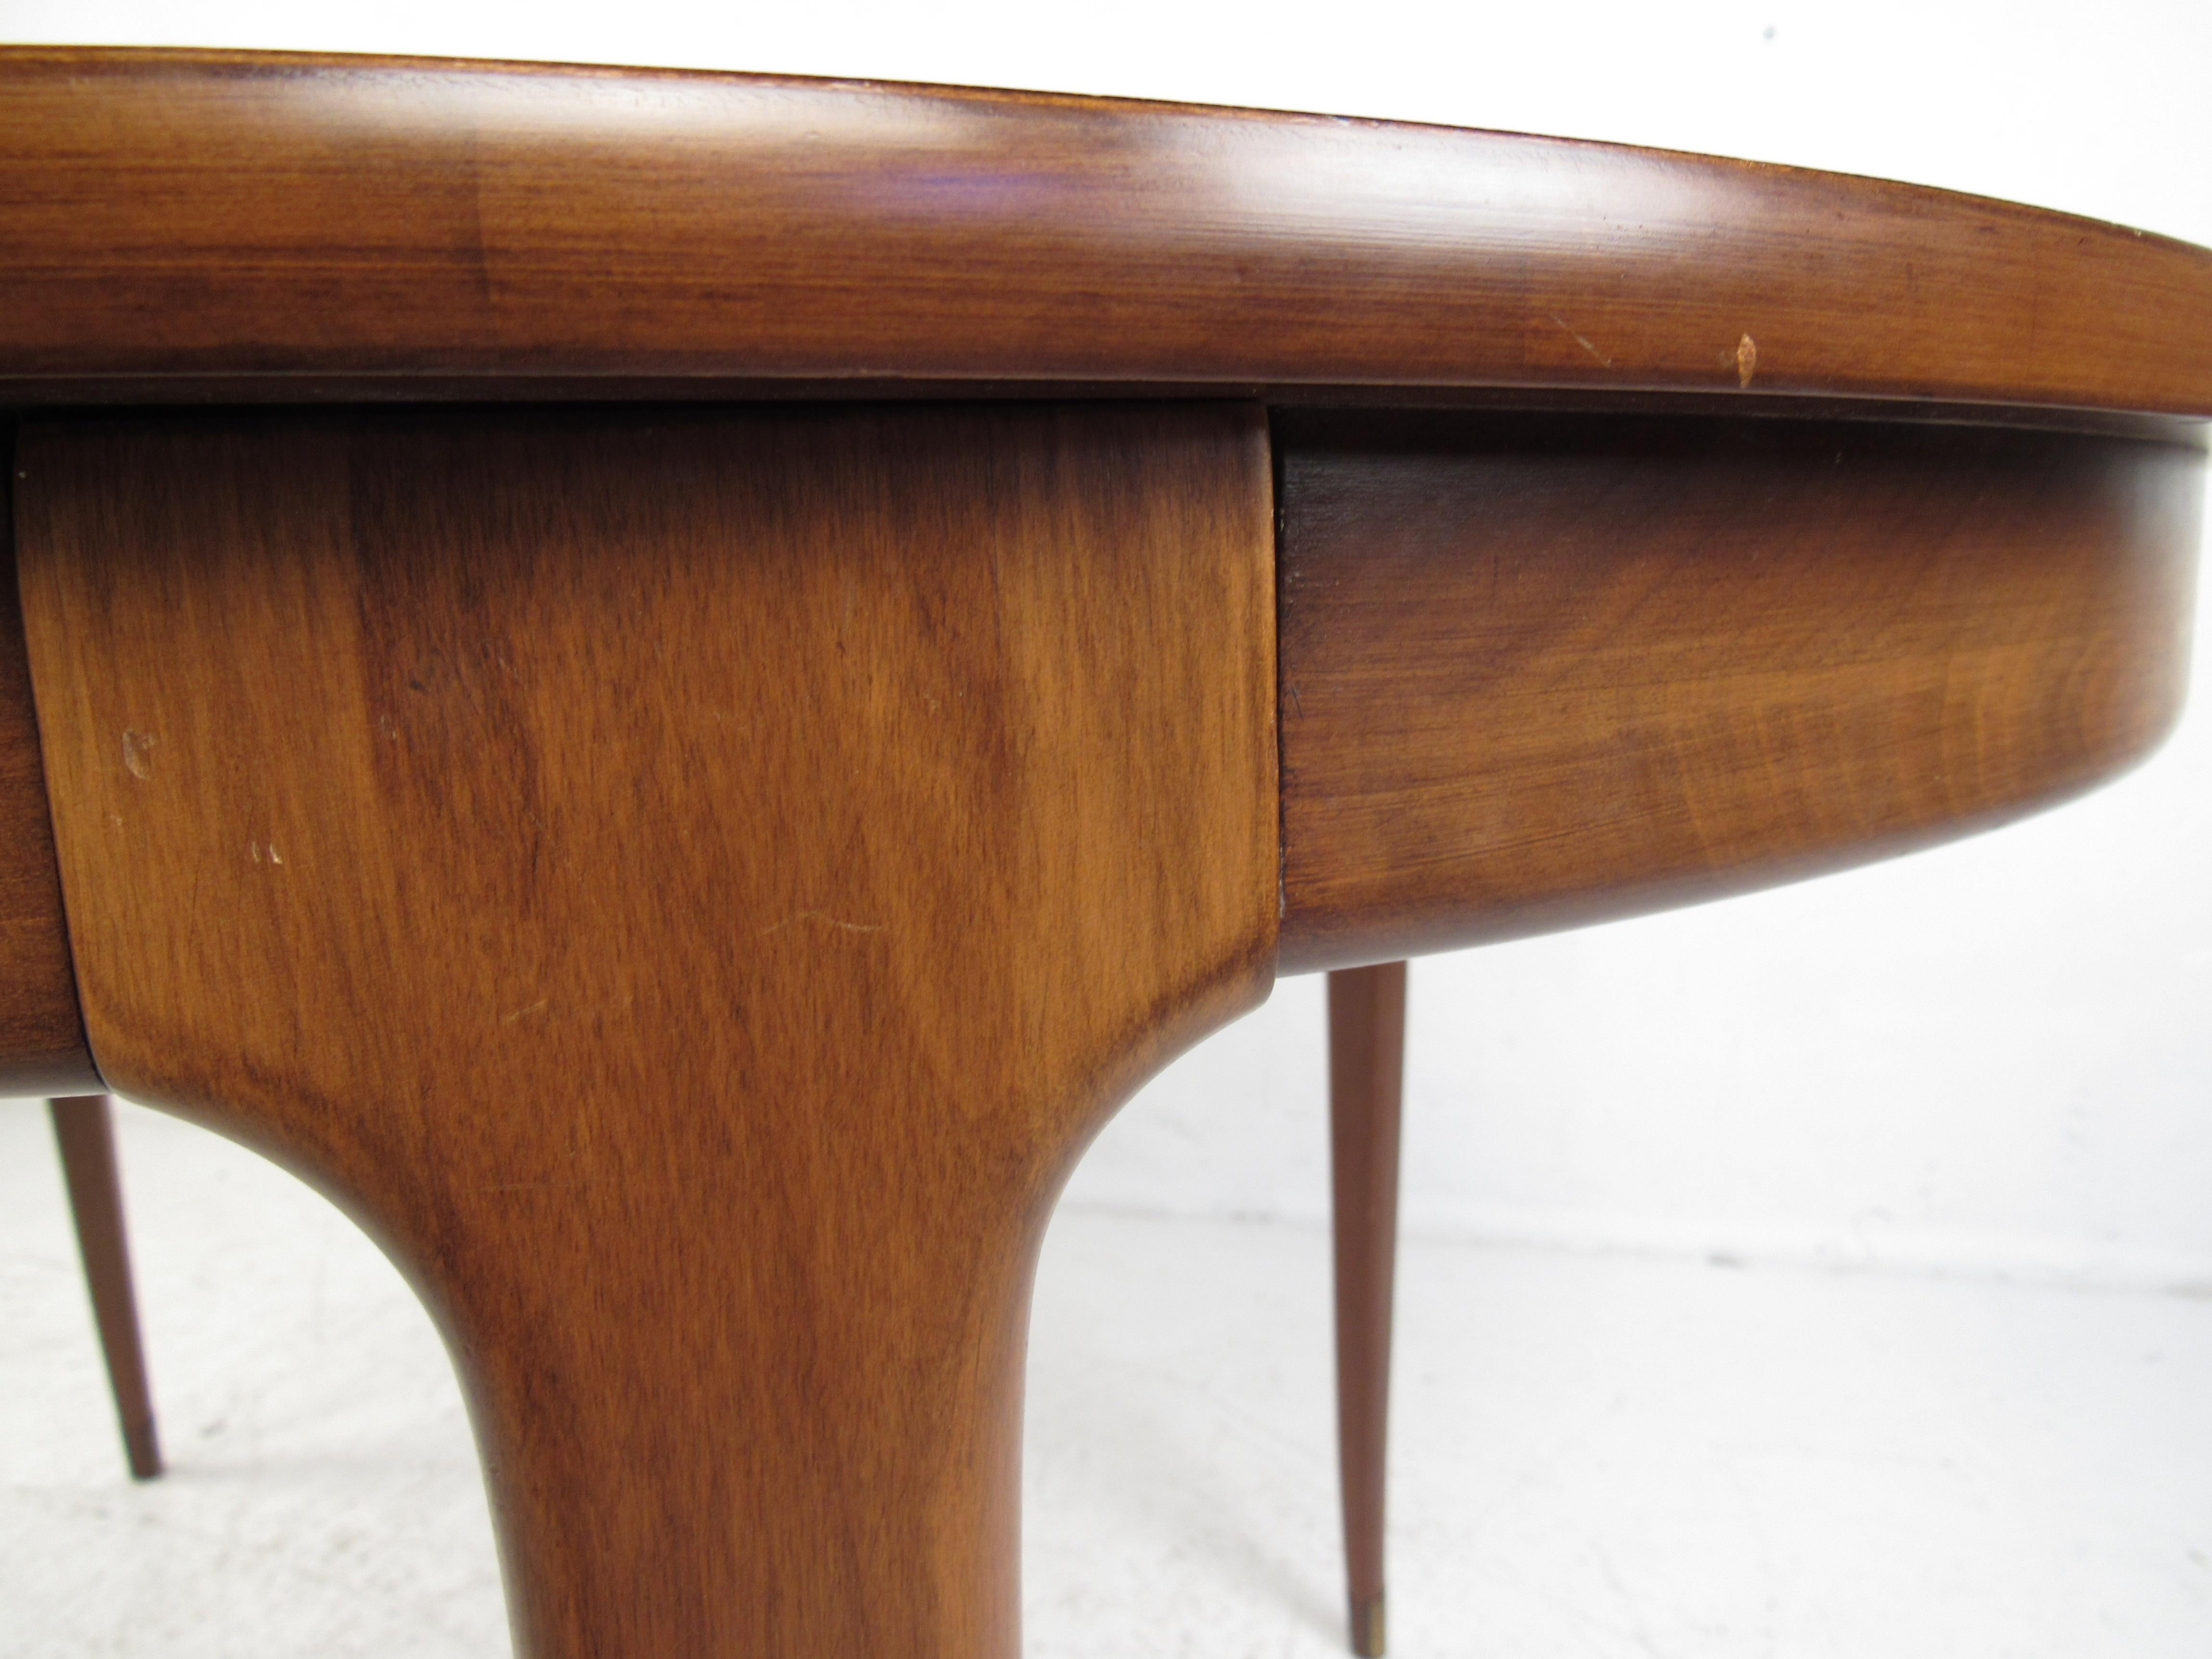 Oval Midcentury Walnut Dining Table by White Furniture Company 6